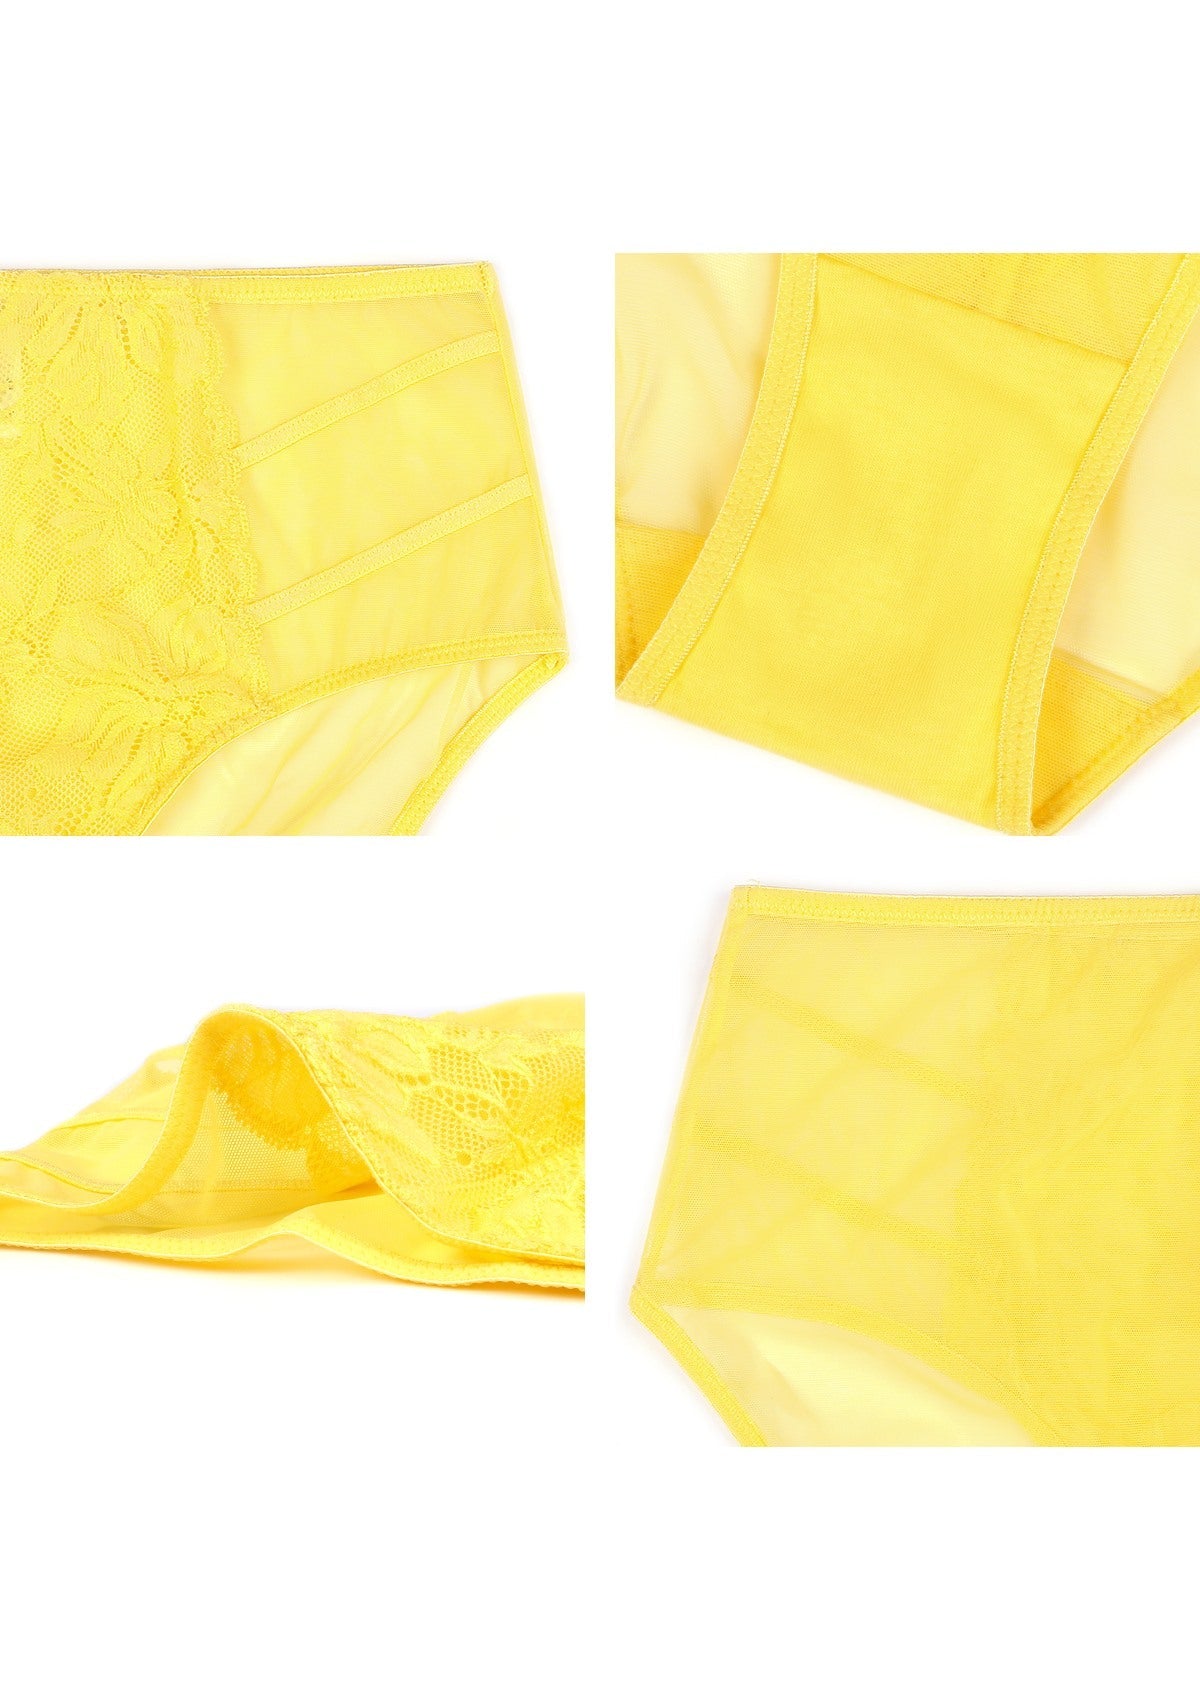 HSIA Spring Romance High-Rise Floral Lacy Panty-Comfort In Style - XL / Bright Yellow